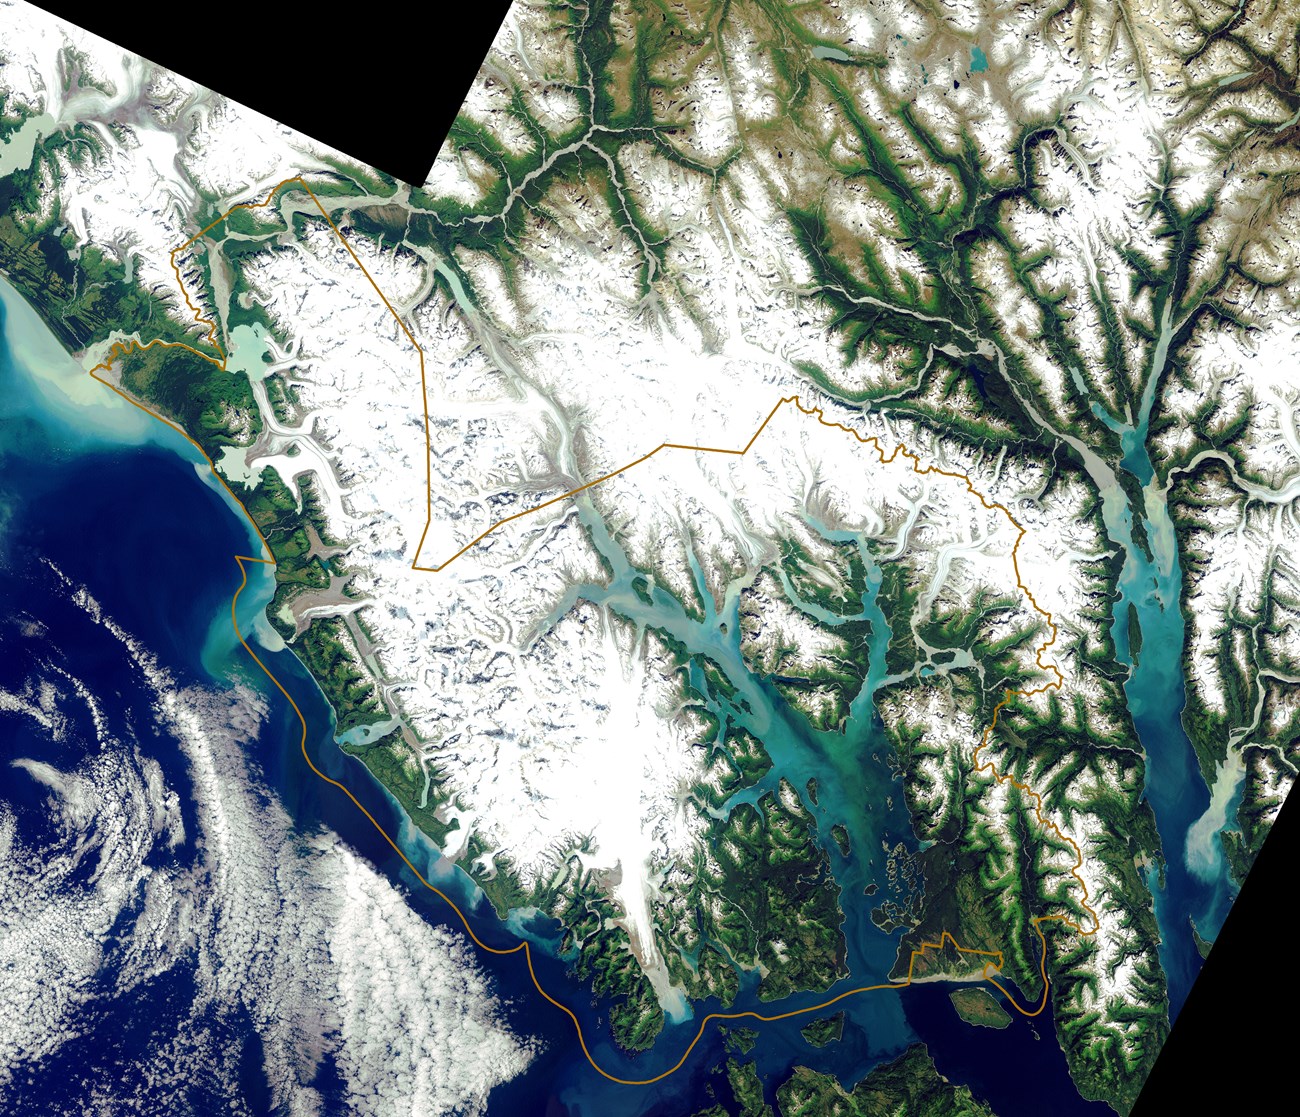 Satellite image of glacier bay with outline of the park and preserve visible.